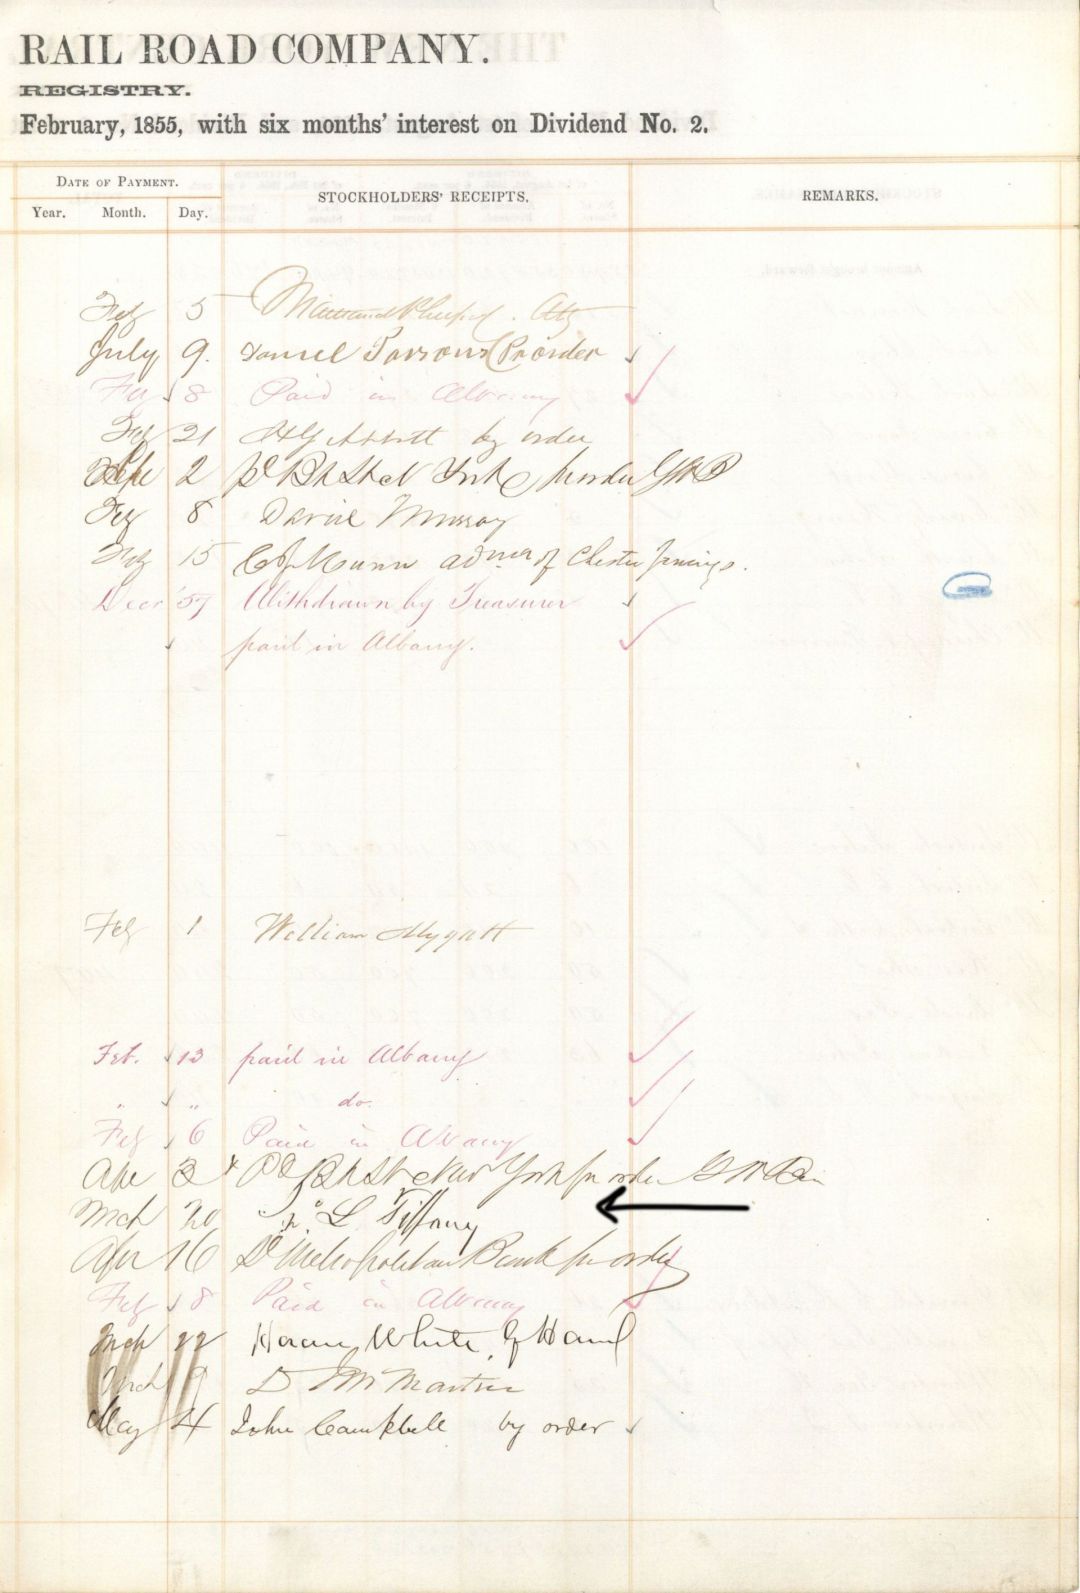 Rail Road Co. signed by J.L. Tiffany  - dated 1855 Stockholders Receipt - American Luxury Jewelry and Specialty Design Company